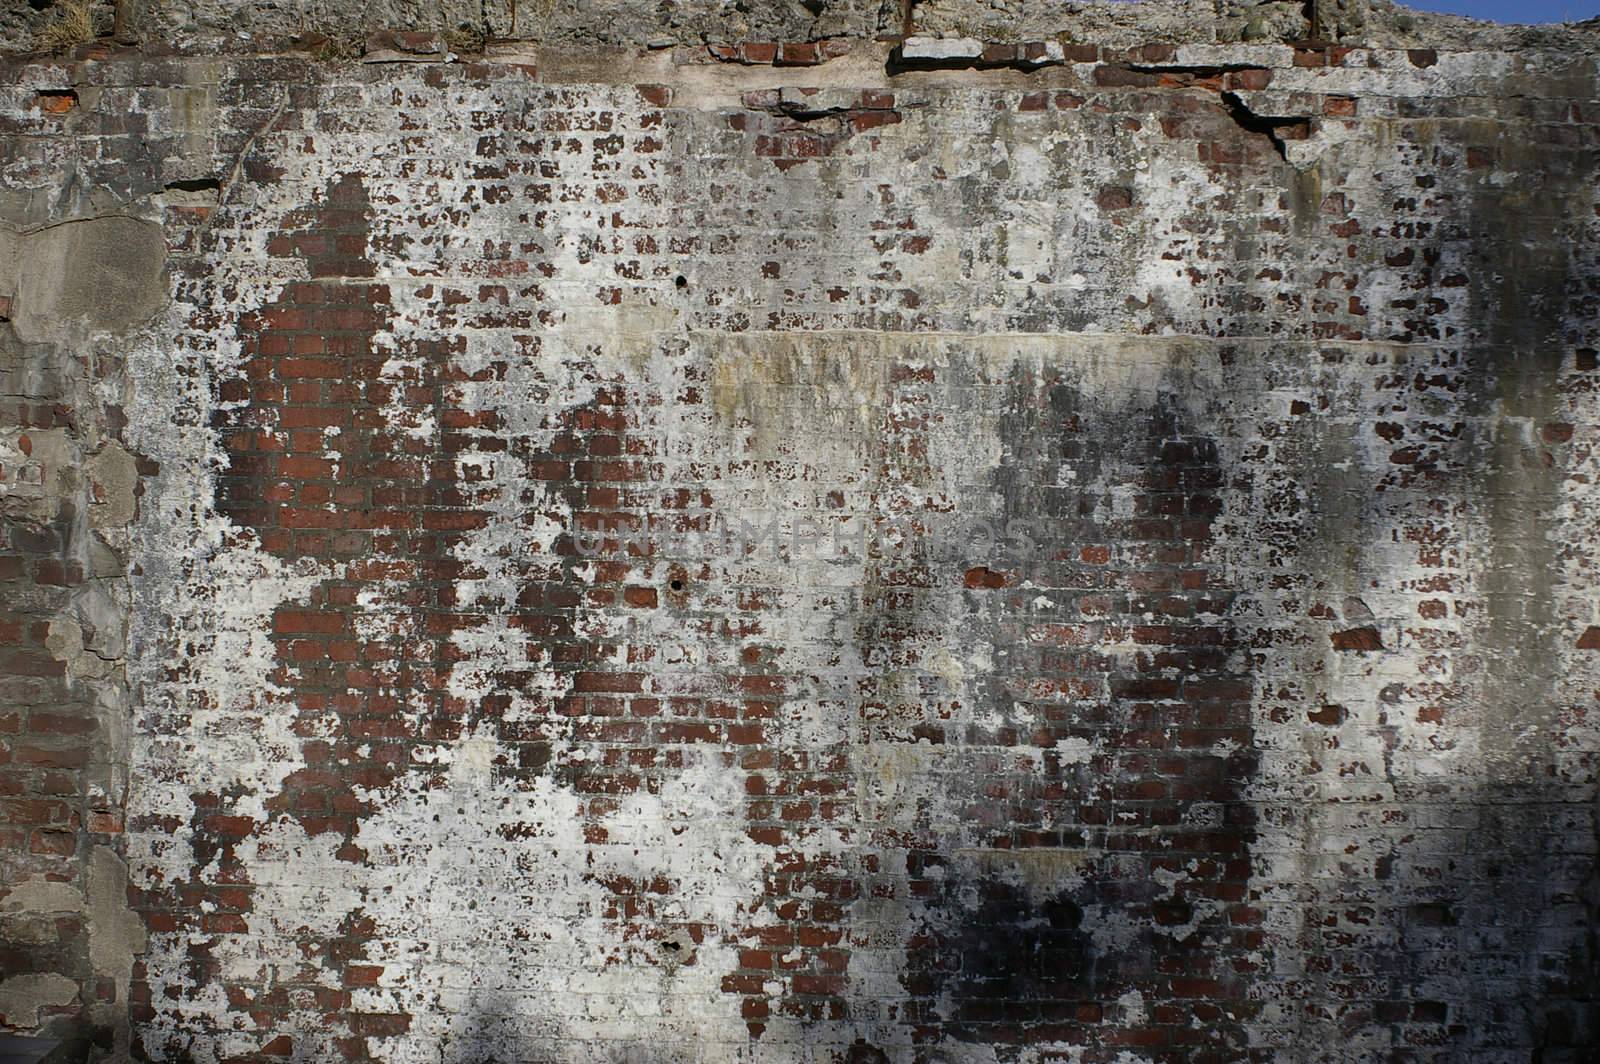 An old brick wall background that has been well weathered from many years of neglect.